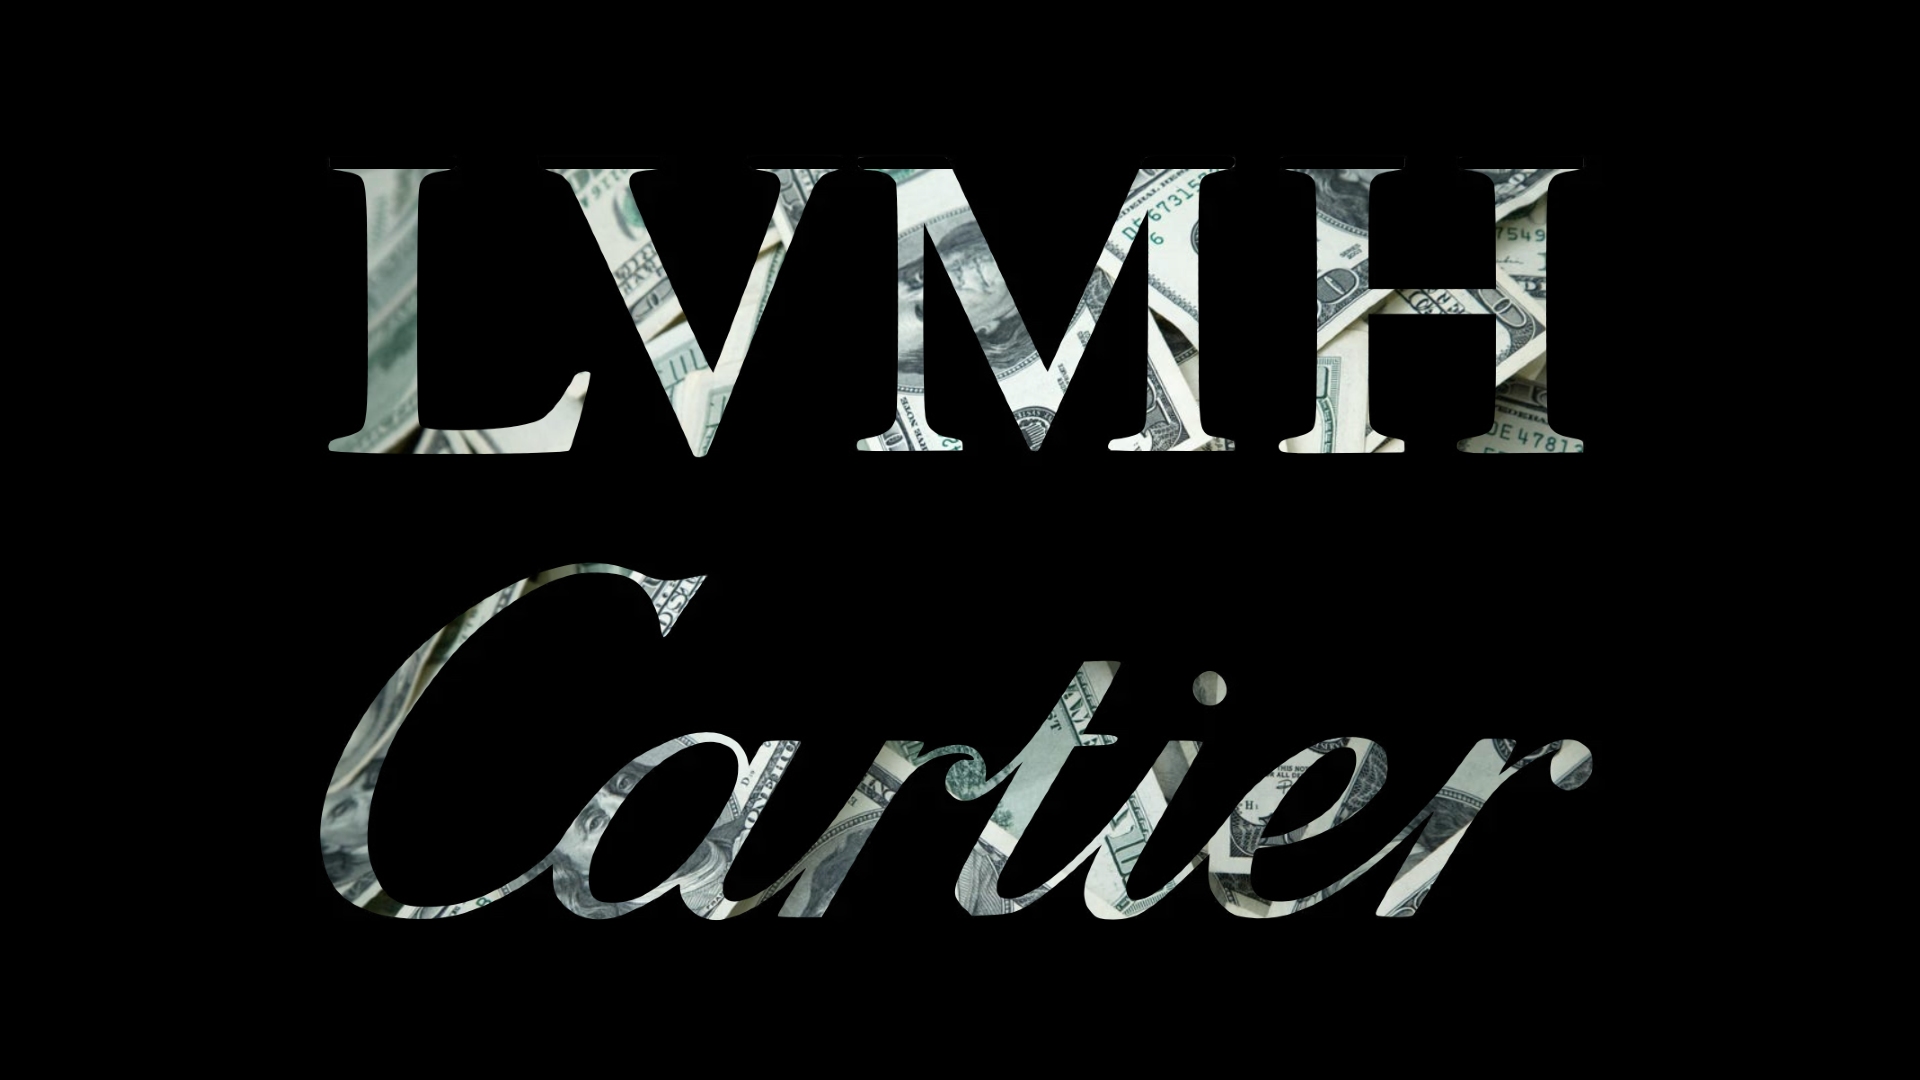 Is Cartier The Next Acquisition Target For LVMH?